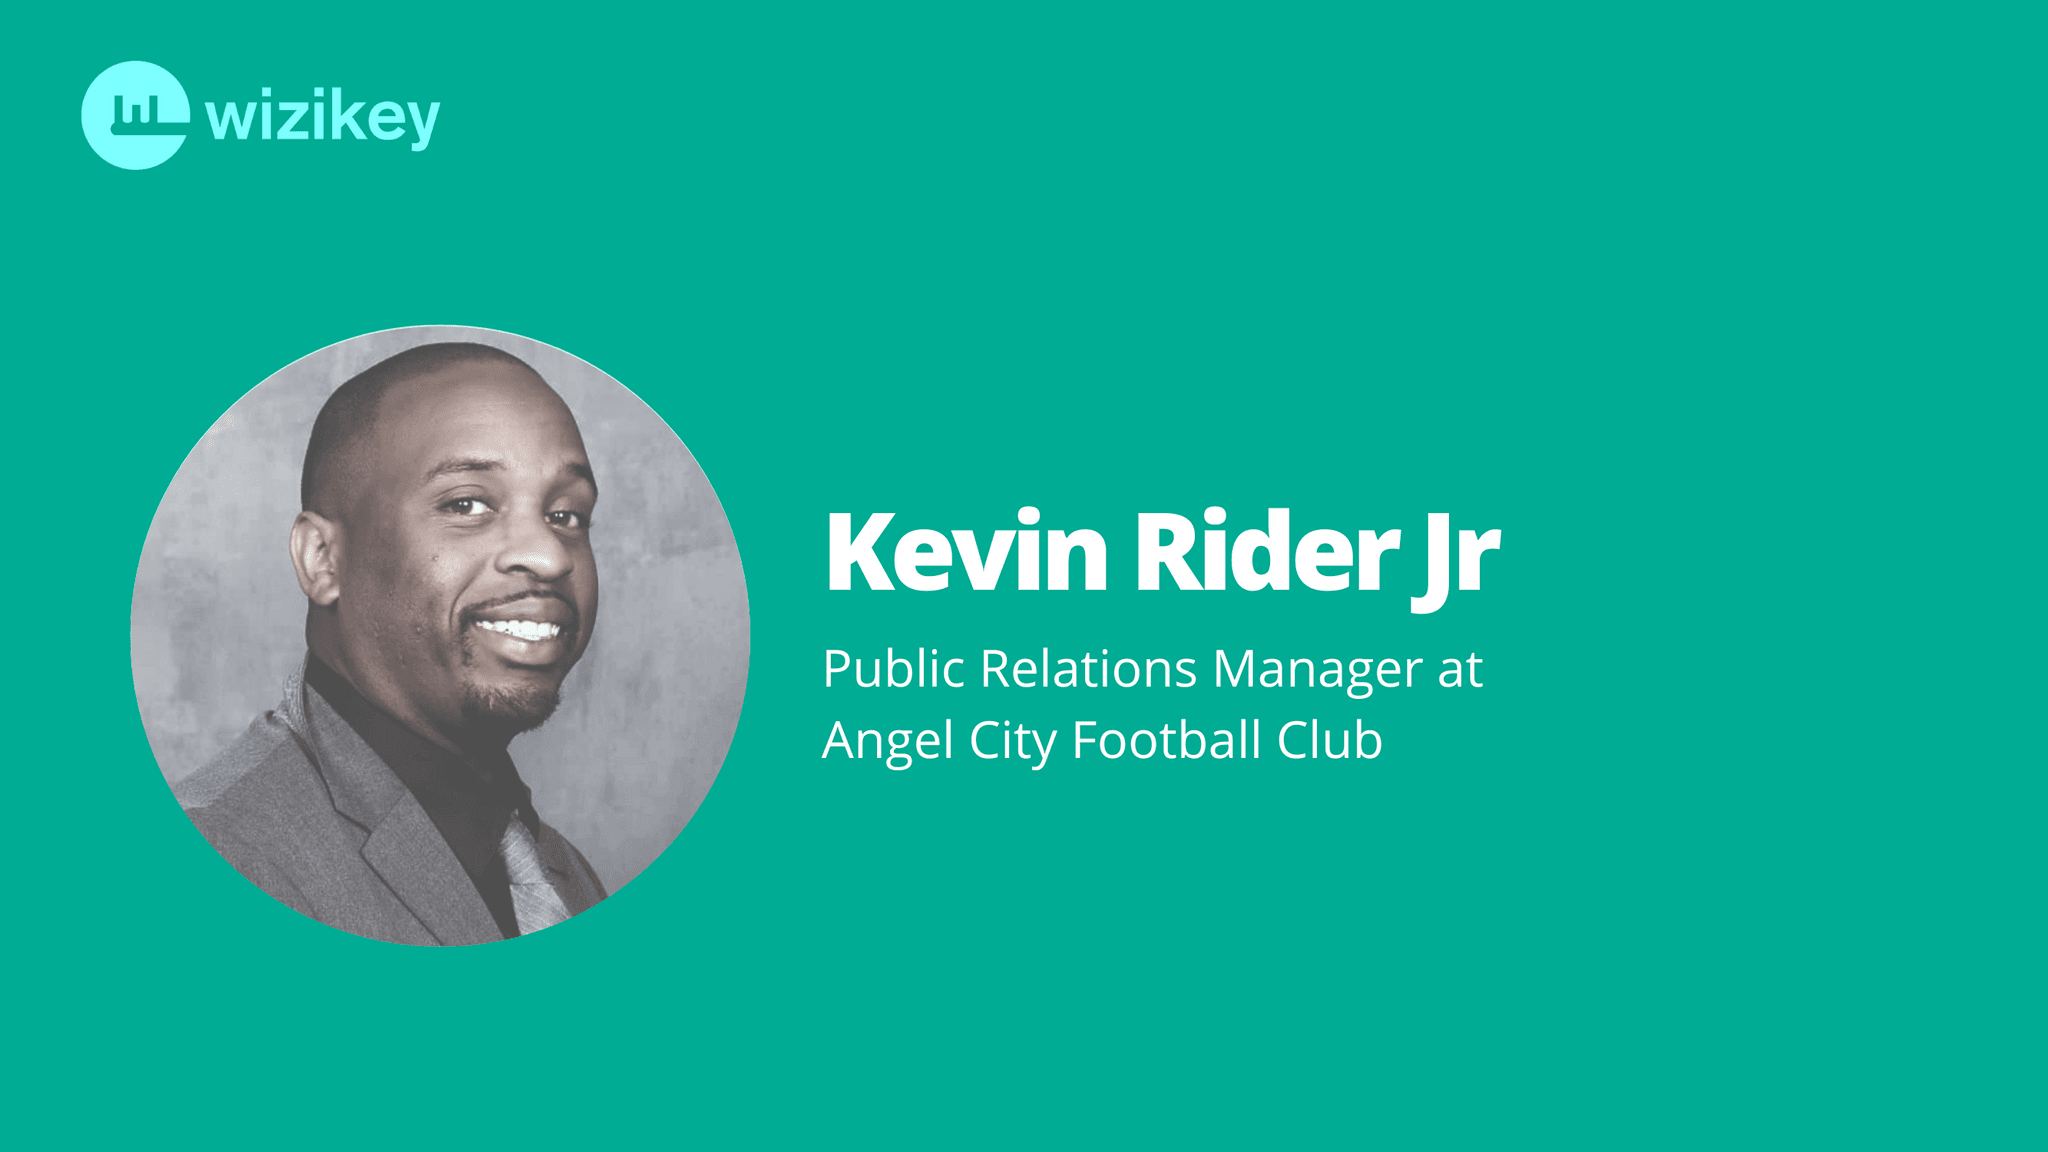 “Use the numbers to be more intentional in your PR approach”-Kevin from Angel City Football Club